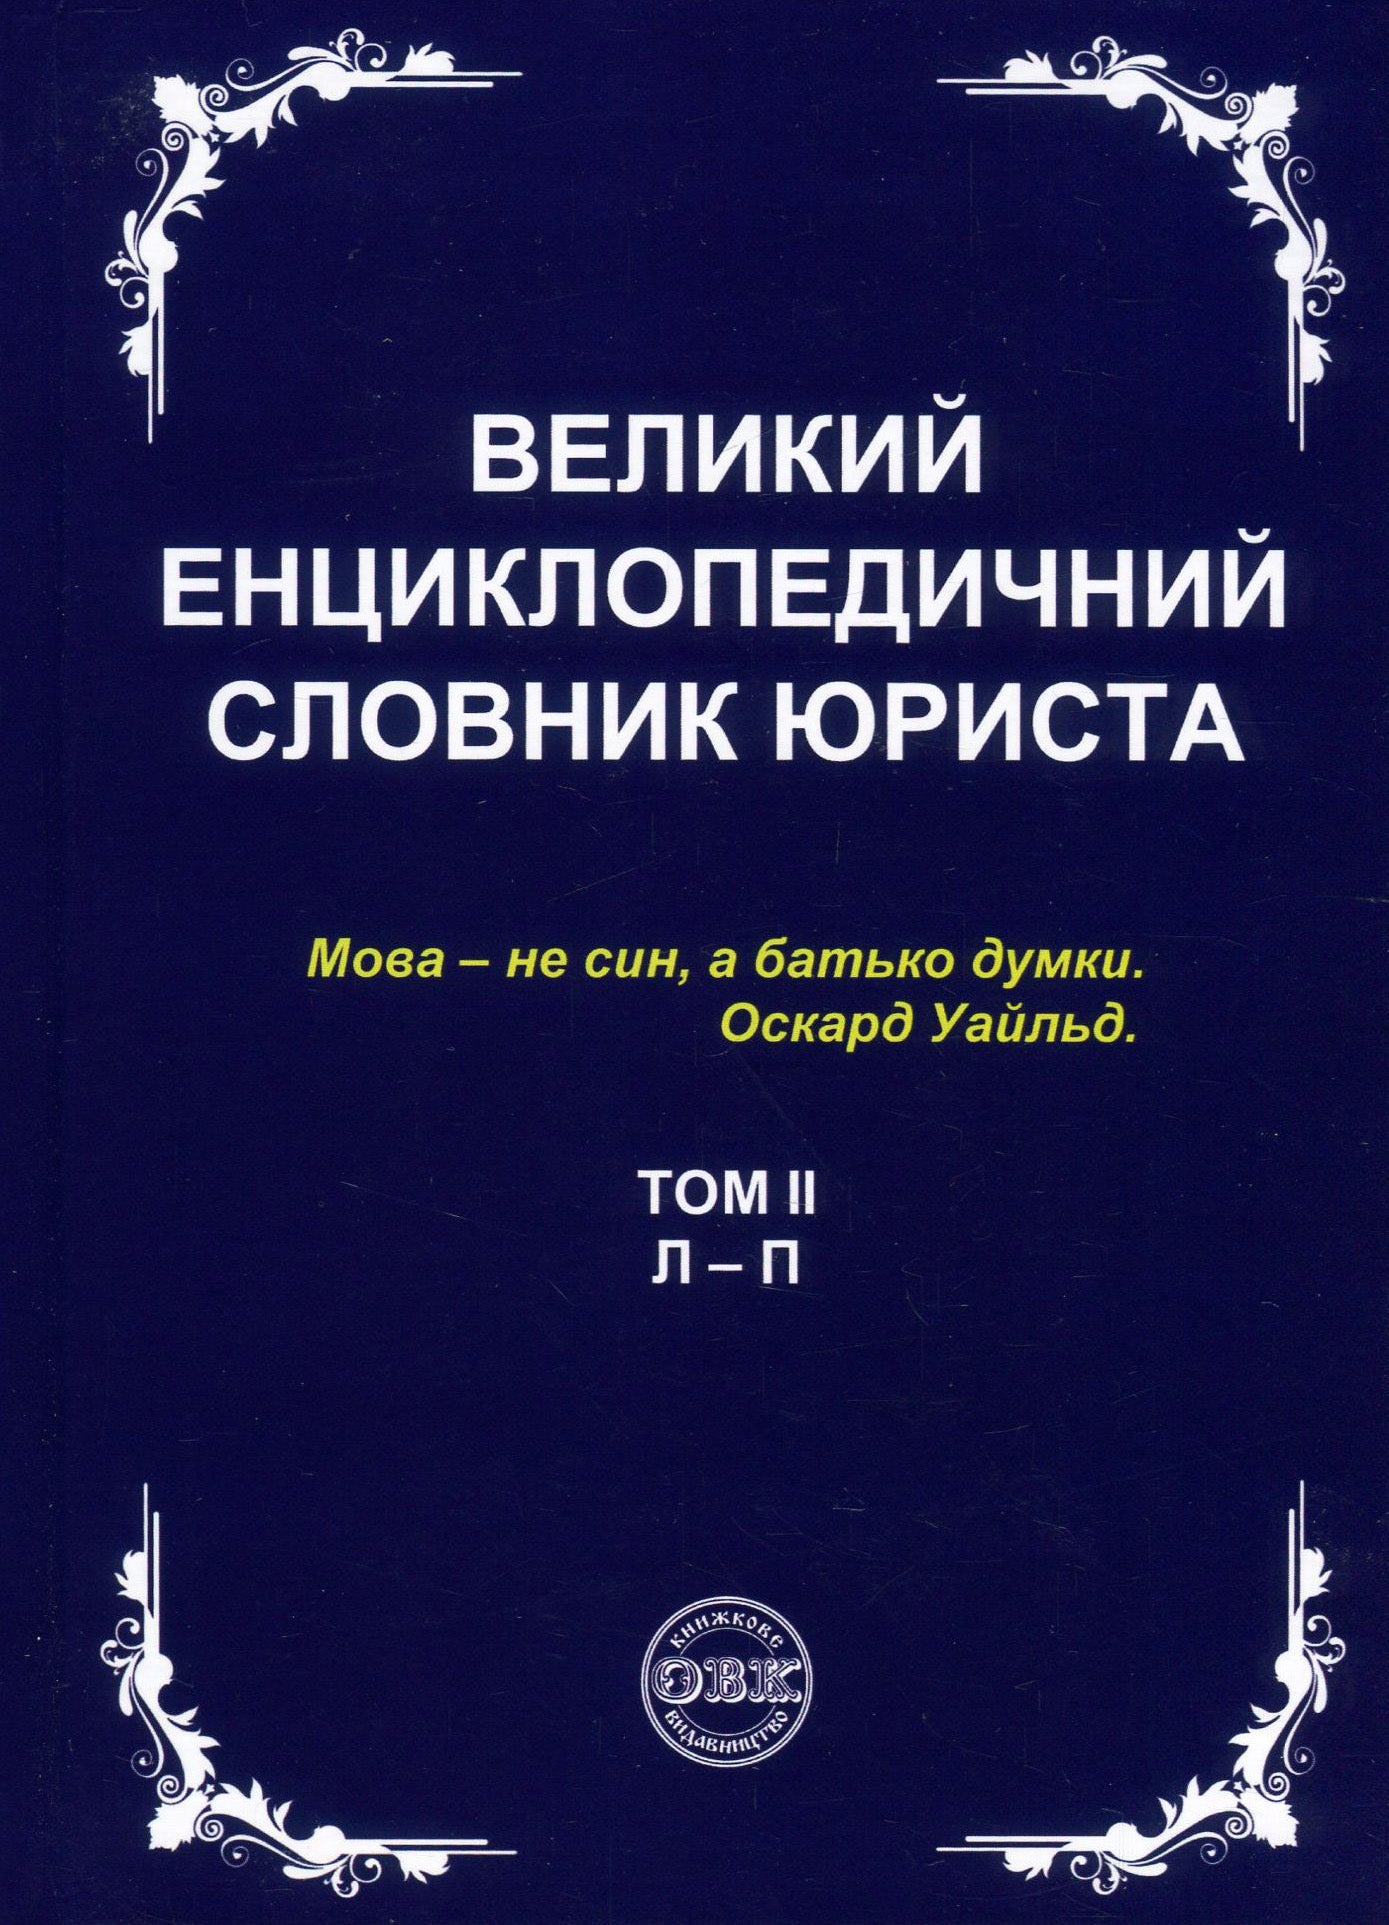 A Large Encyclopedic Dictionary Of A Lawyer. In 3 Volumes (Set Of 3 Books) / Великий енциклопедичний словник юриста. У 3 томах (комплект з 3 книг) / Author not specified 9786177159437,9786177159444,9786177159451,9786177159468-4